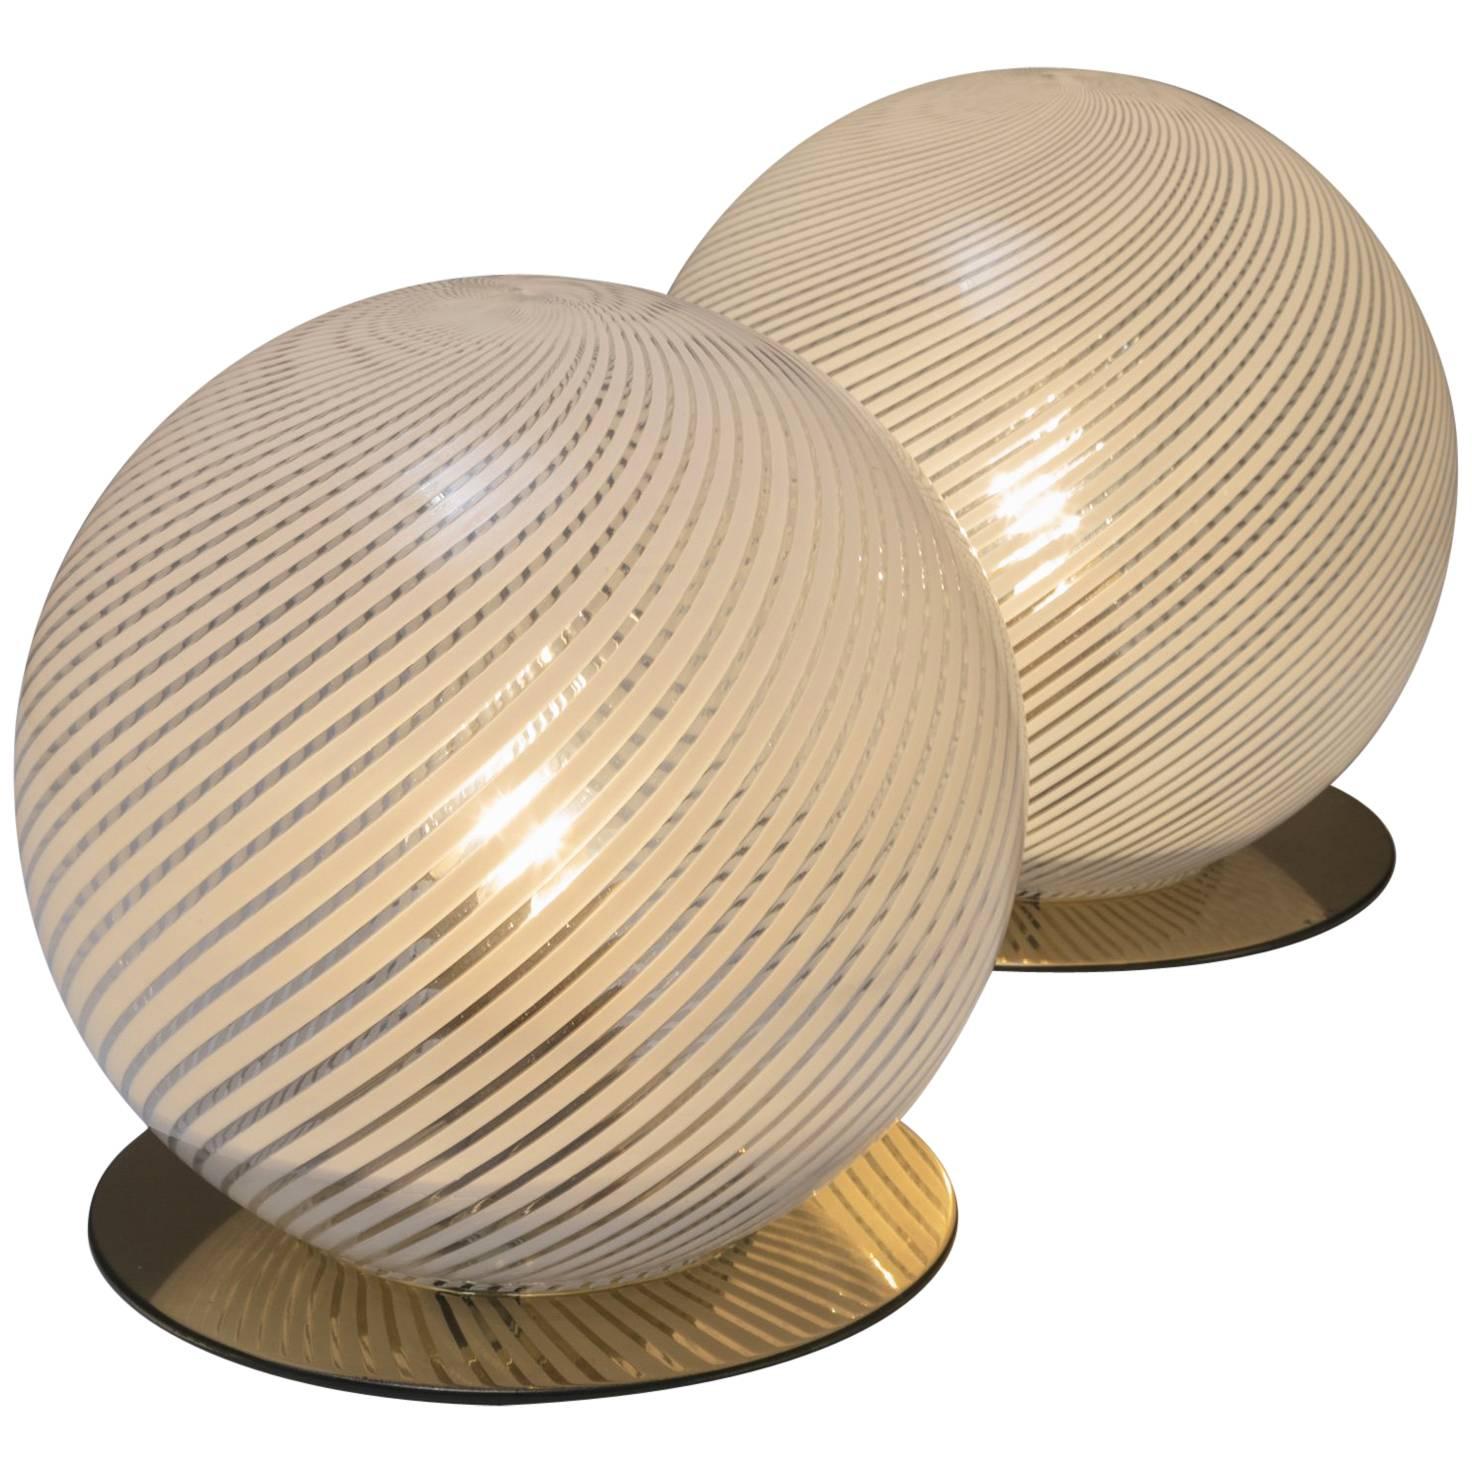 Pair of "Tessuto" Table Lamps by Tronconi